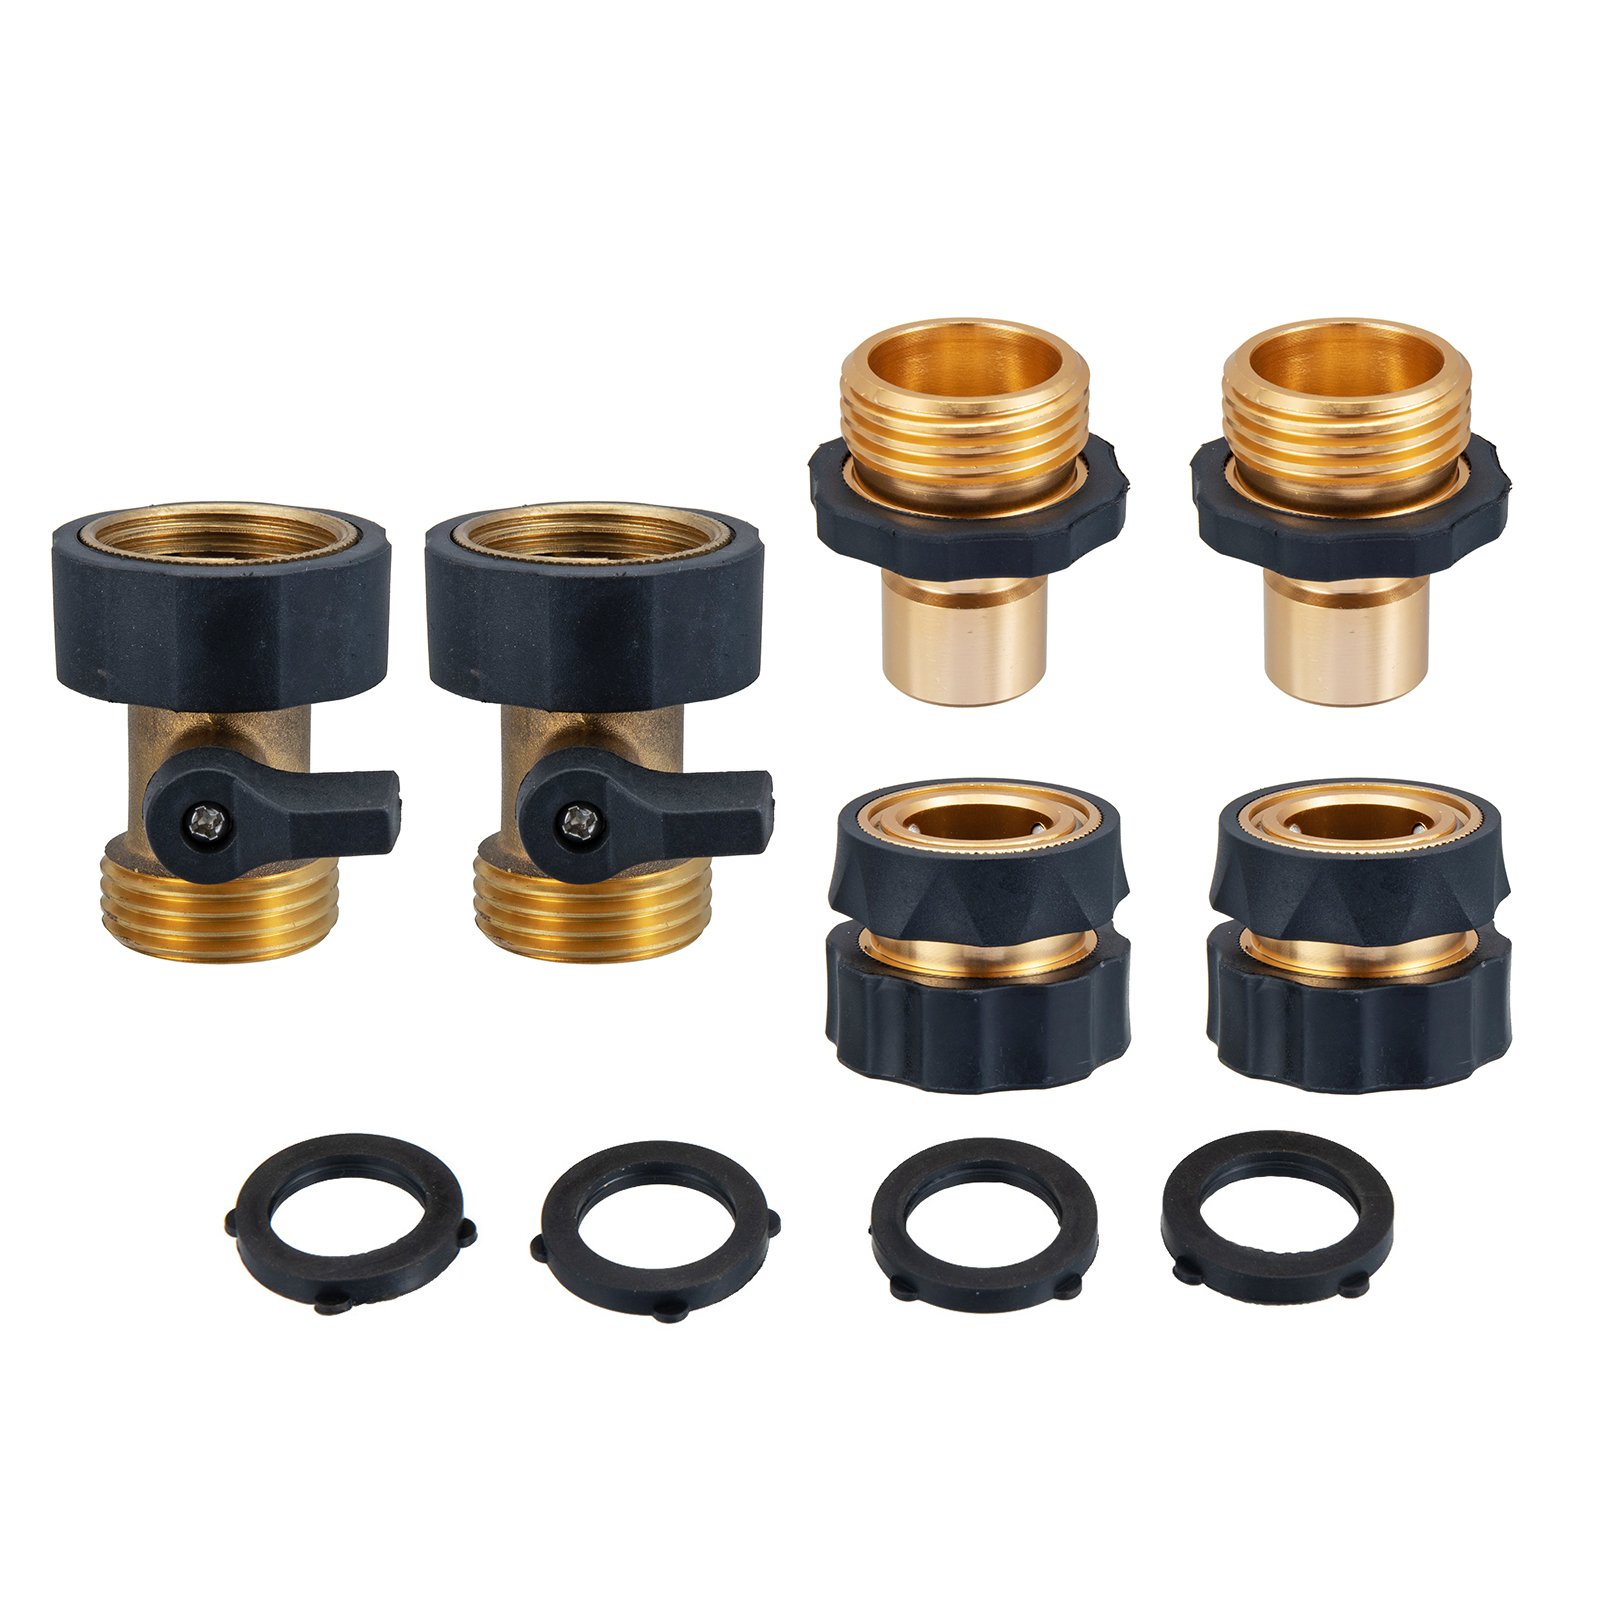 34-Garden-Hose-Quick-Connect-Water-Hose-Fit-Brass-Female-Male-Connector-Set-1943824-1